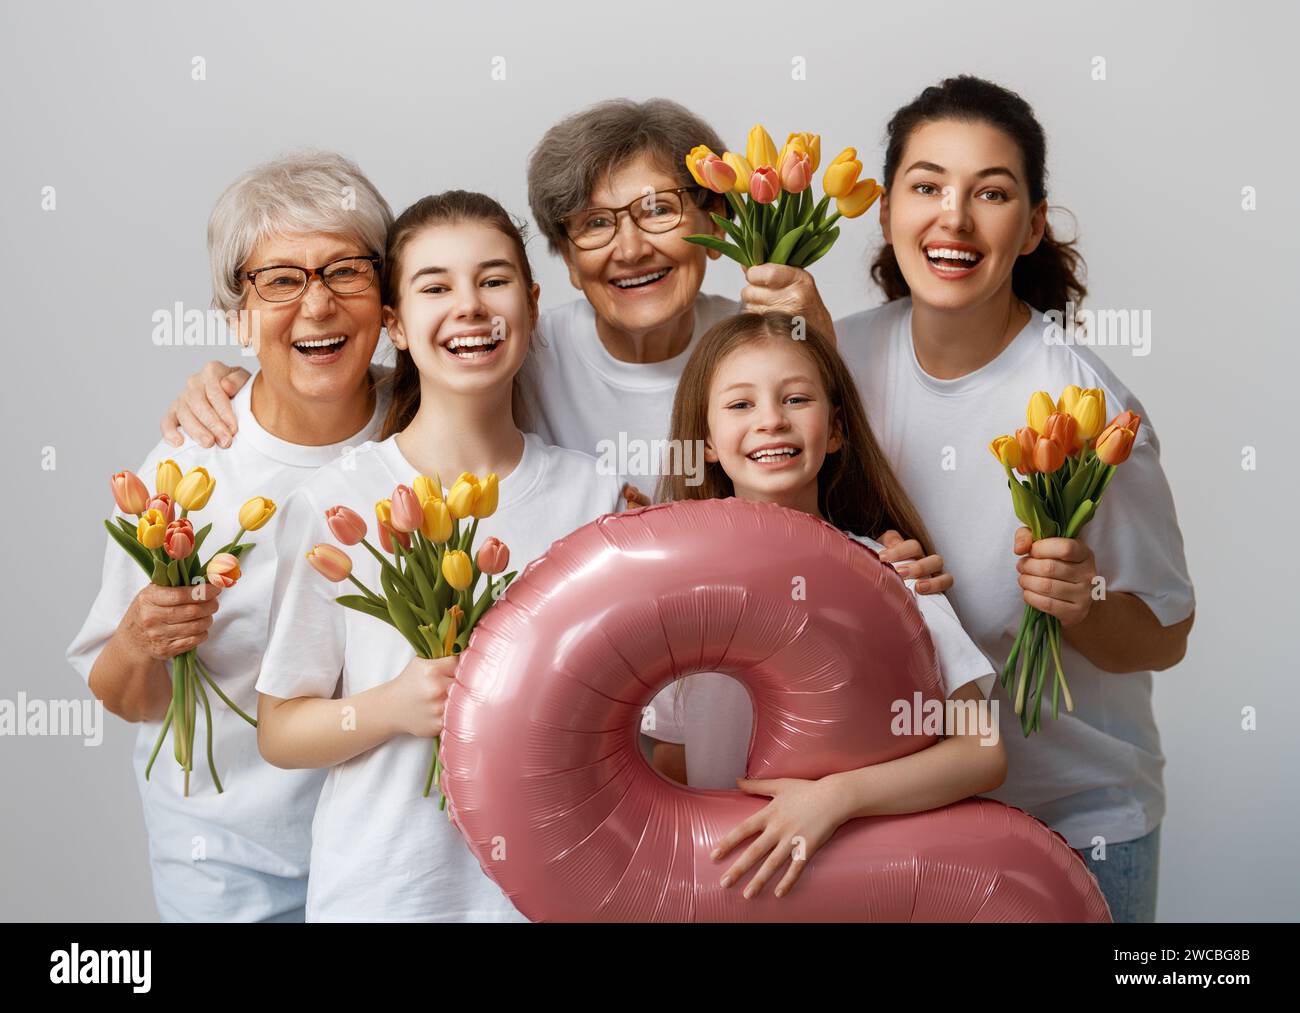 Happy women's day! Children daughters are congratulating mom and grandmothers giving them flowers tulips. Grannys, mom and girls smiling on light grey Stock Photo